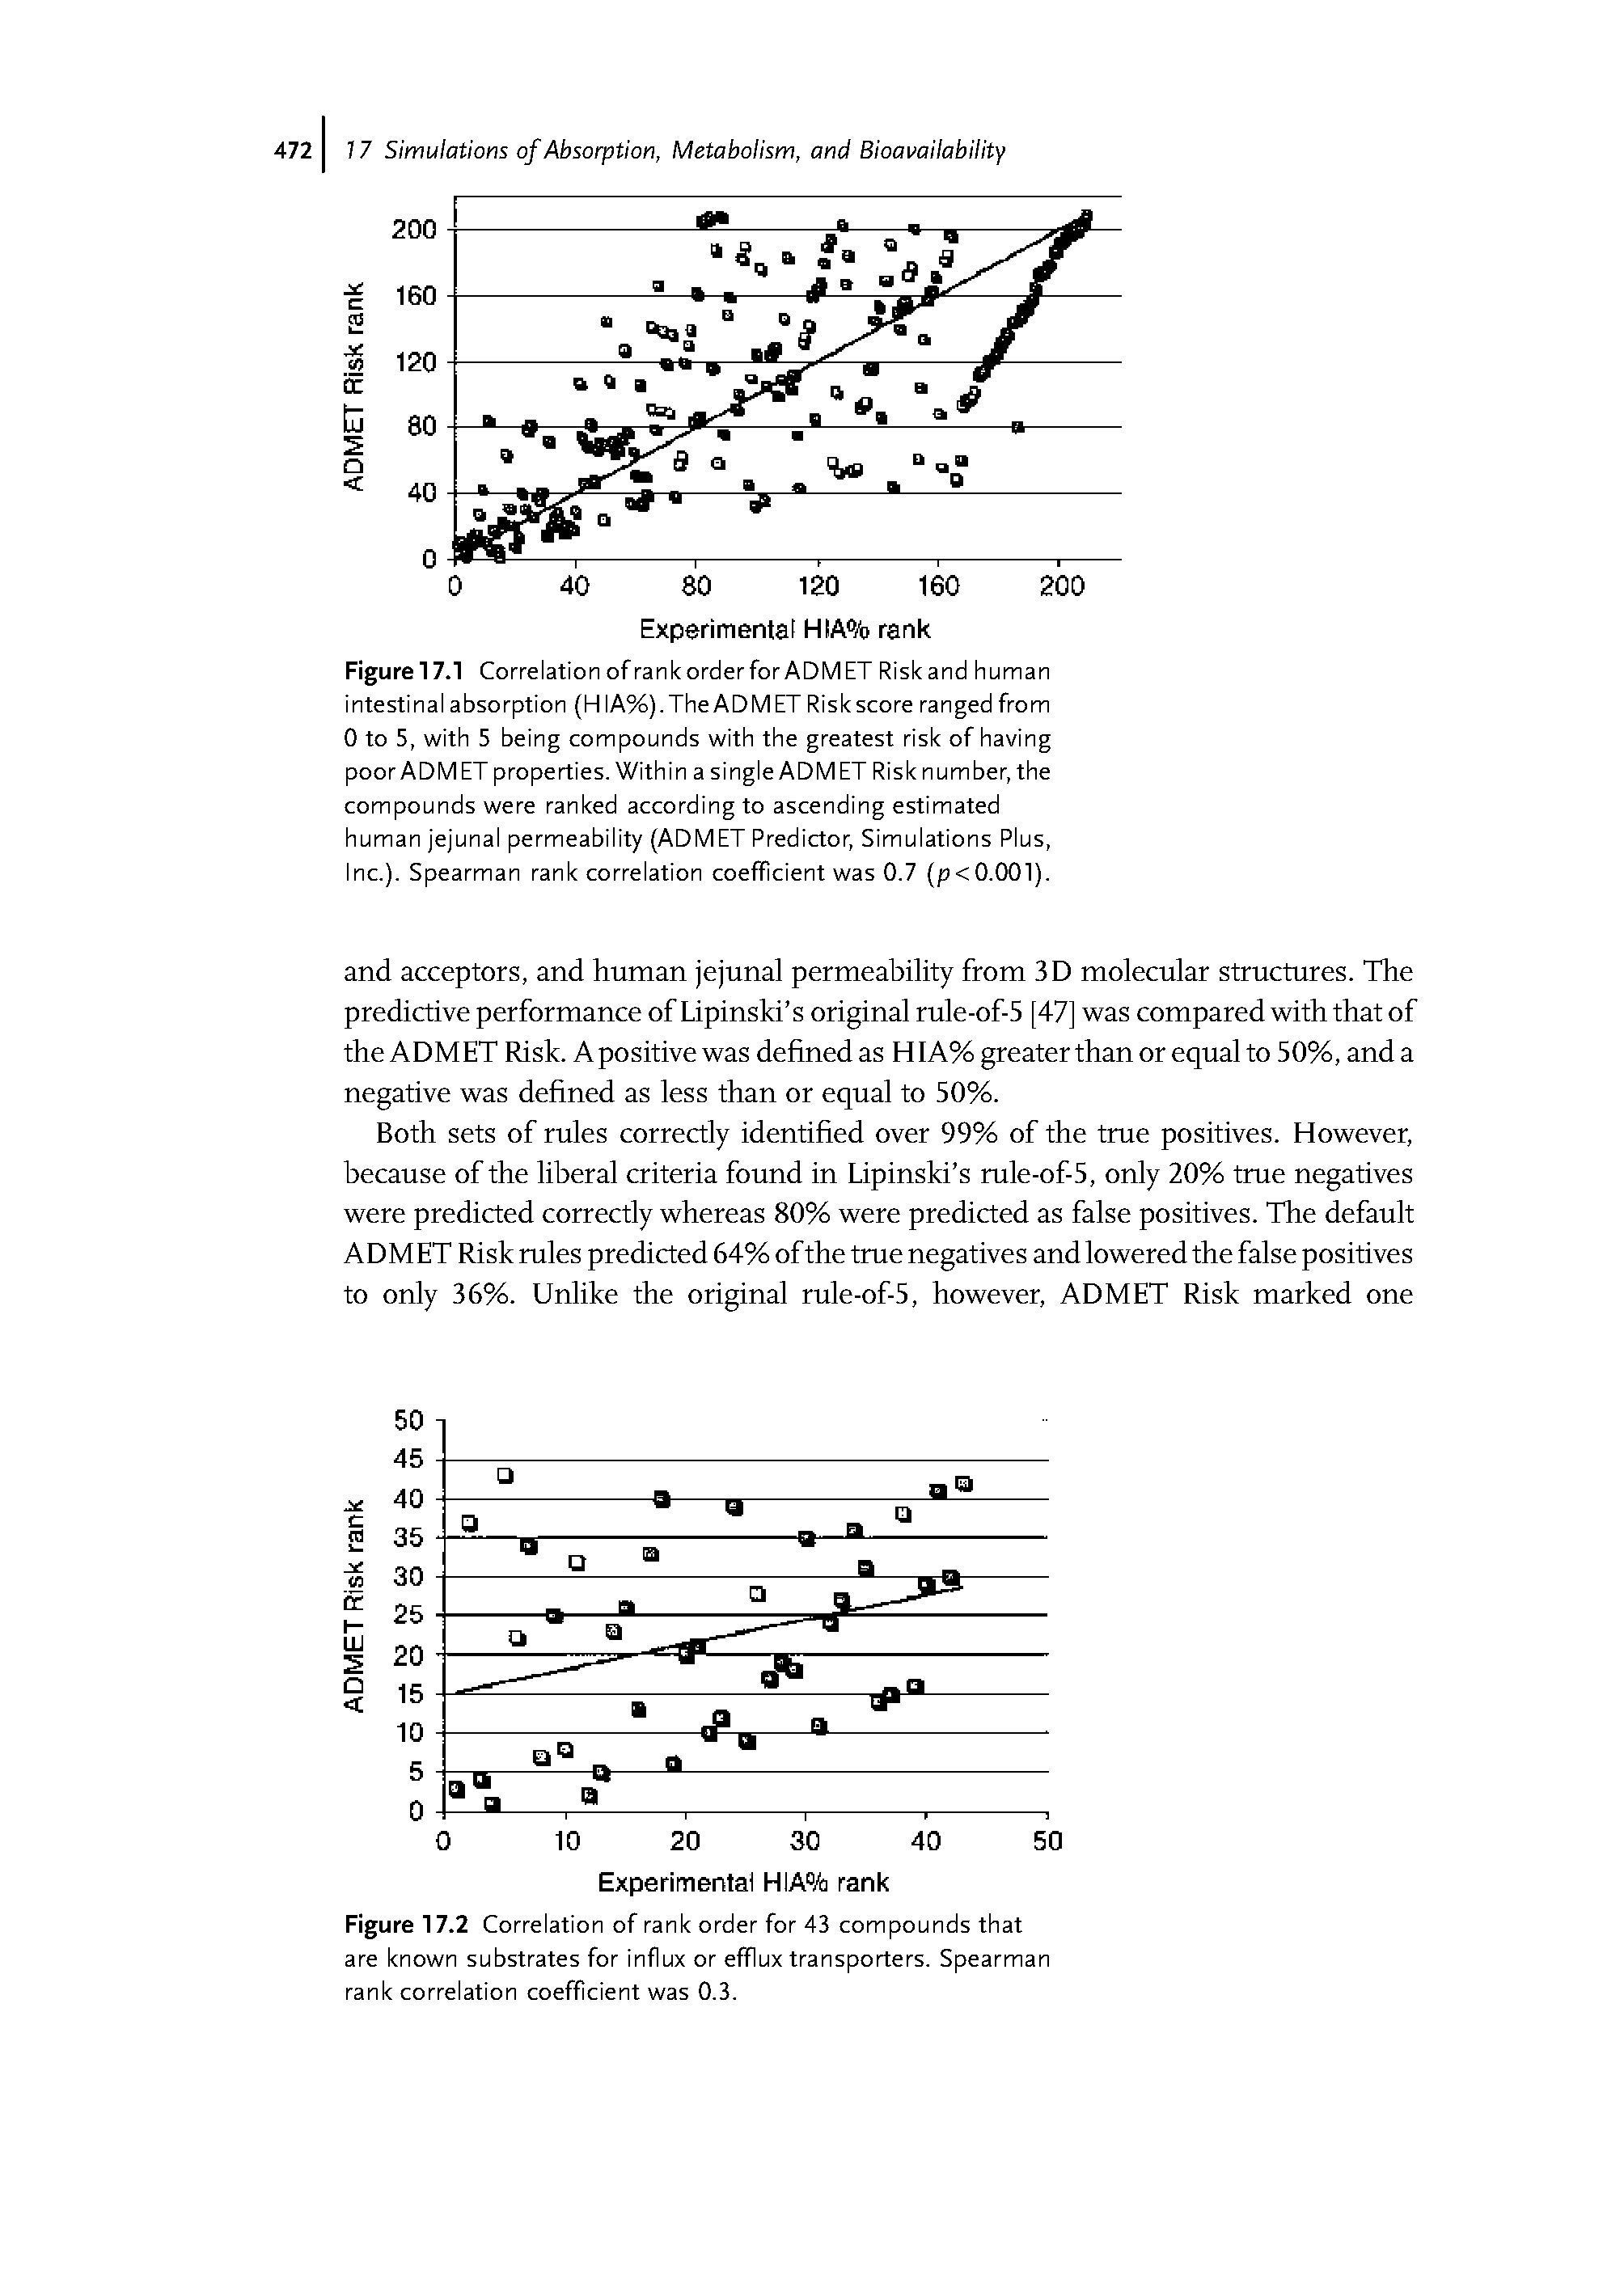 Figure 17.2 Correlation of rank order for 43 compounds that are known substrates for influx or efflux transporters. Spearman rank correlation coefficient was 0.3.